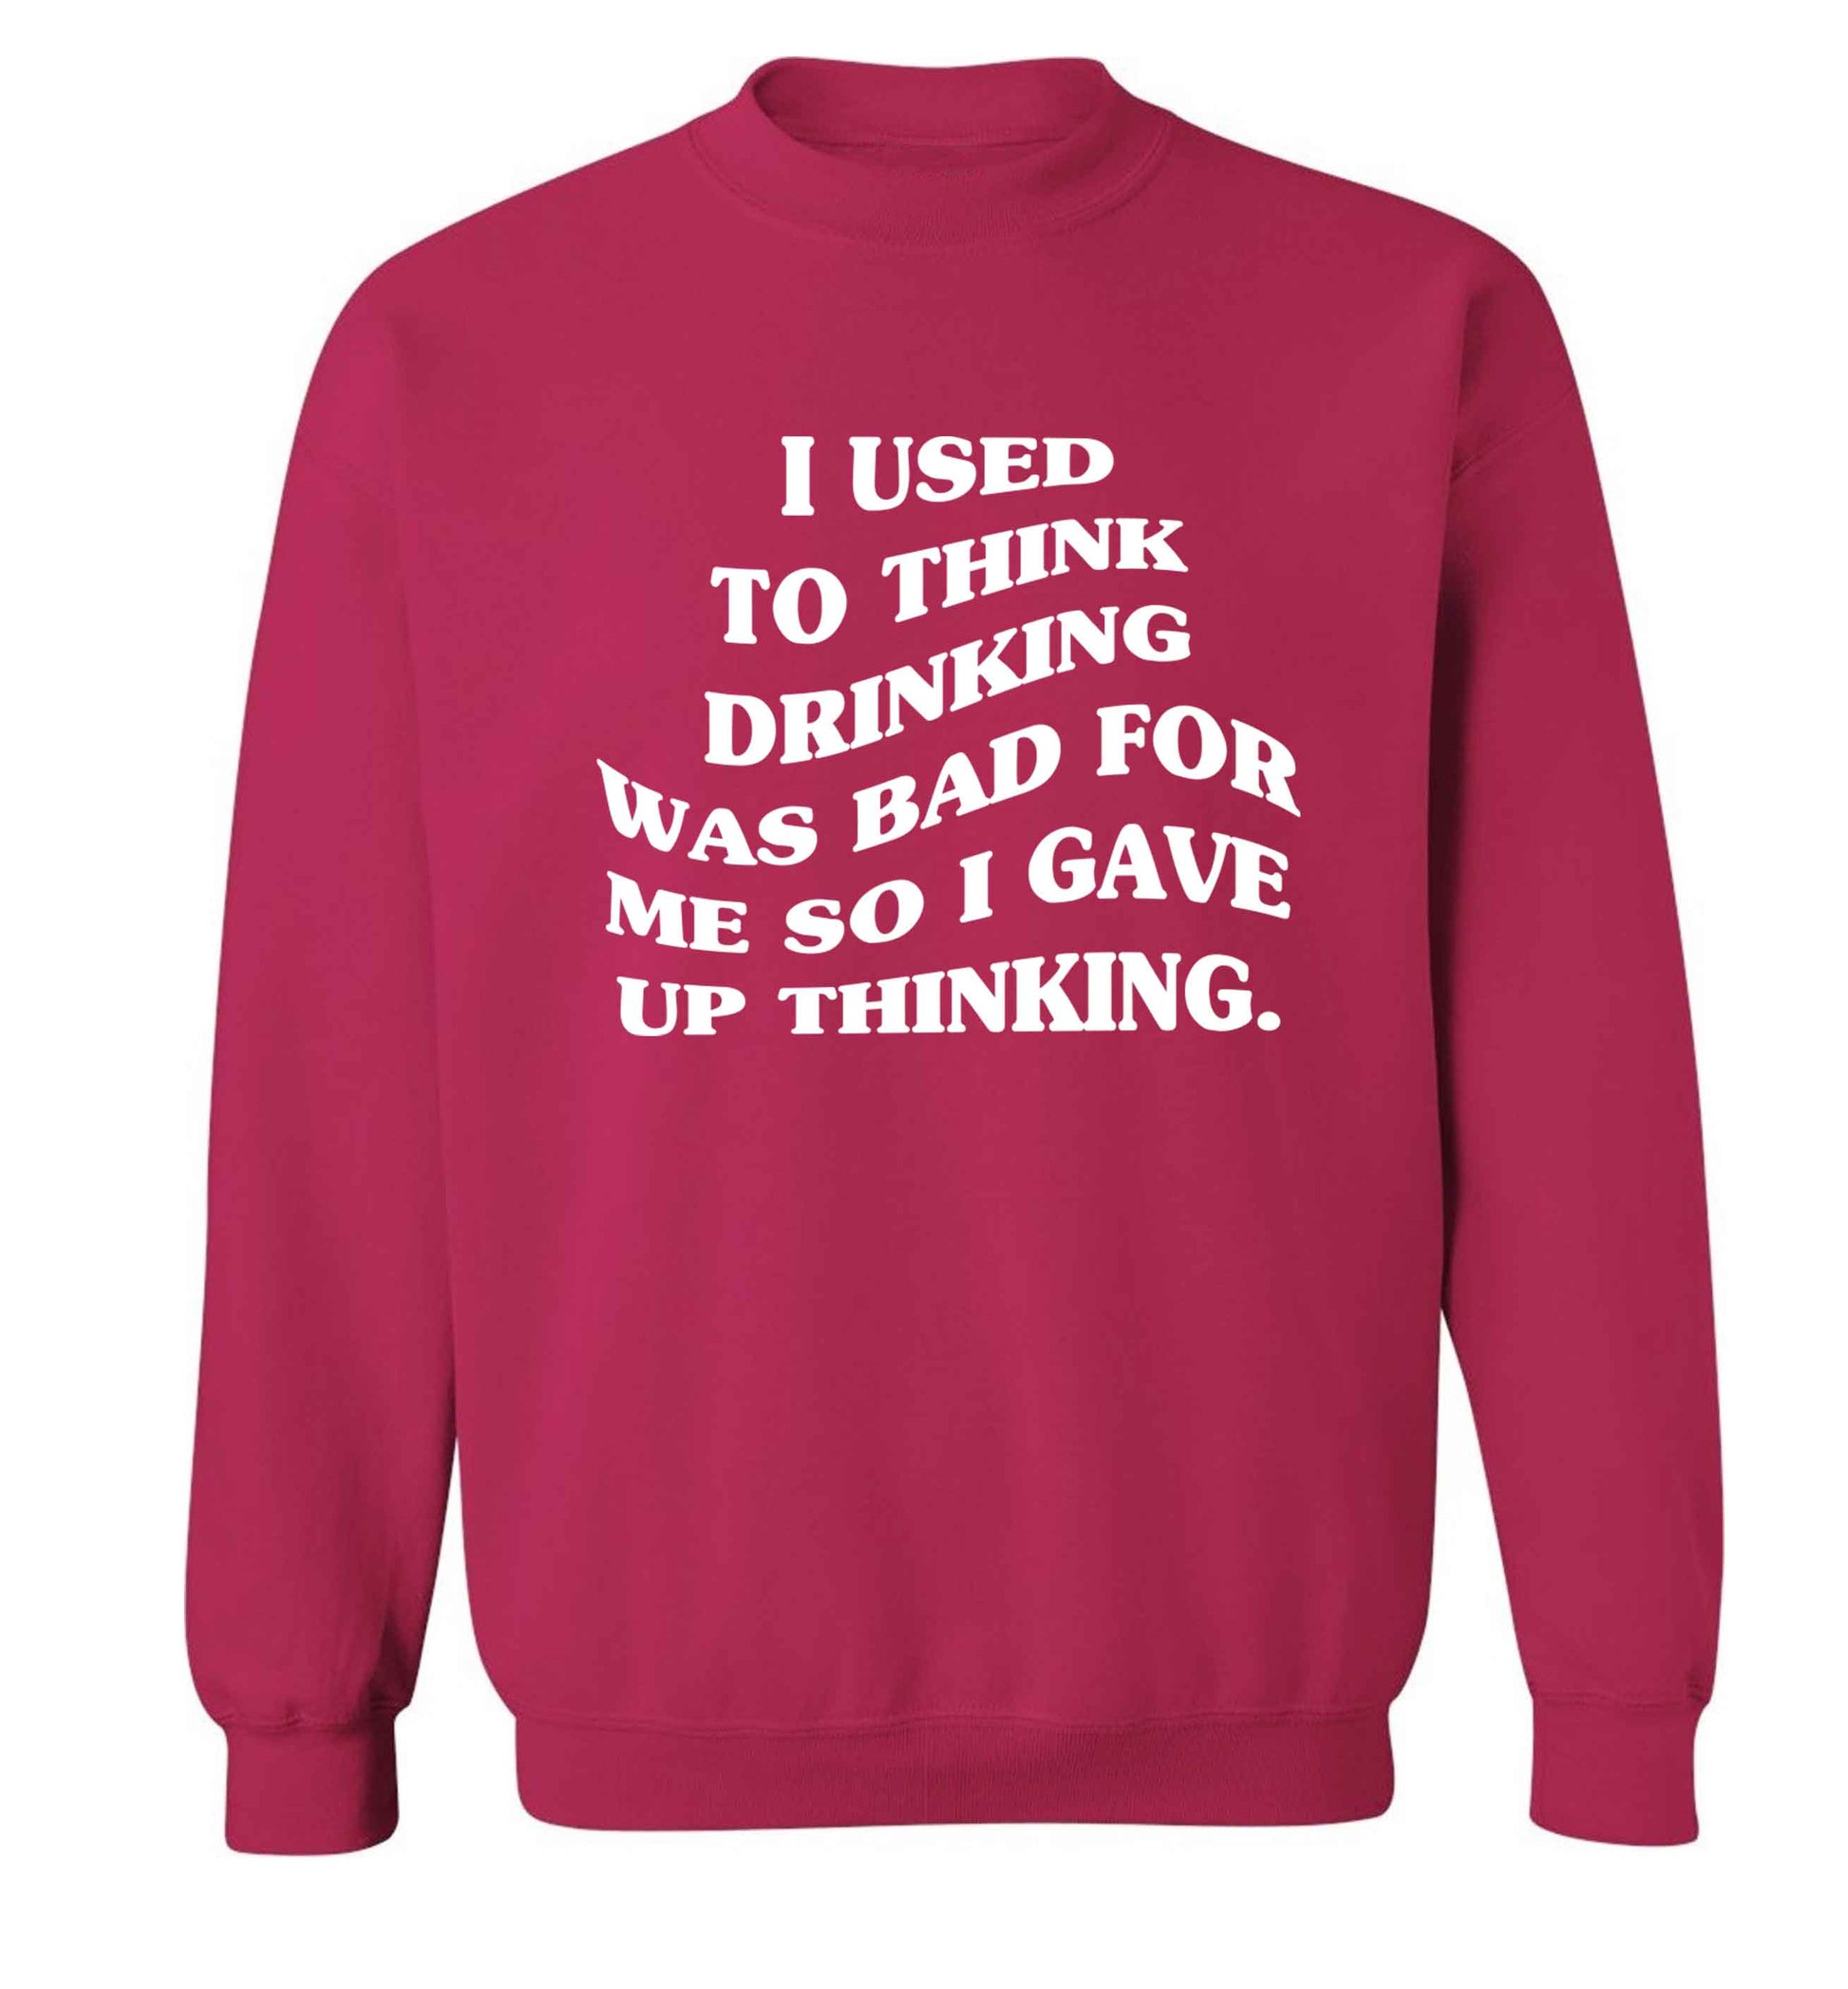 I used to think drinking was bad so I gave up thinking Adult's unisex pink Sweater 2XL